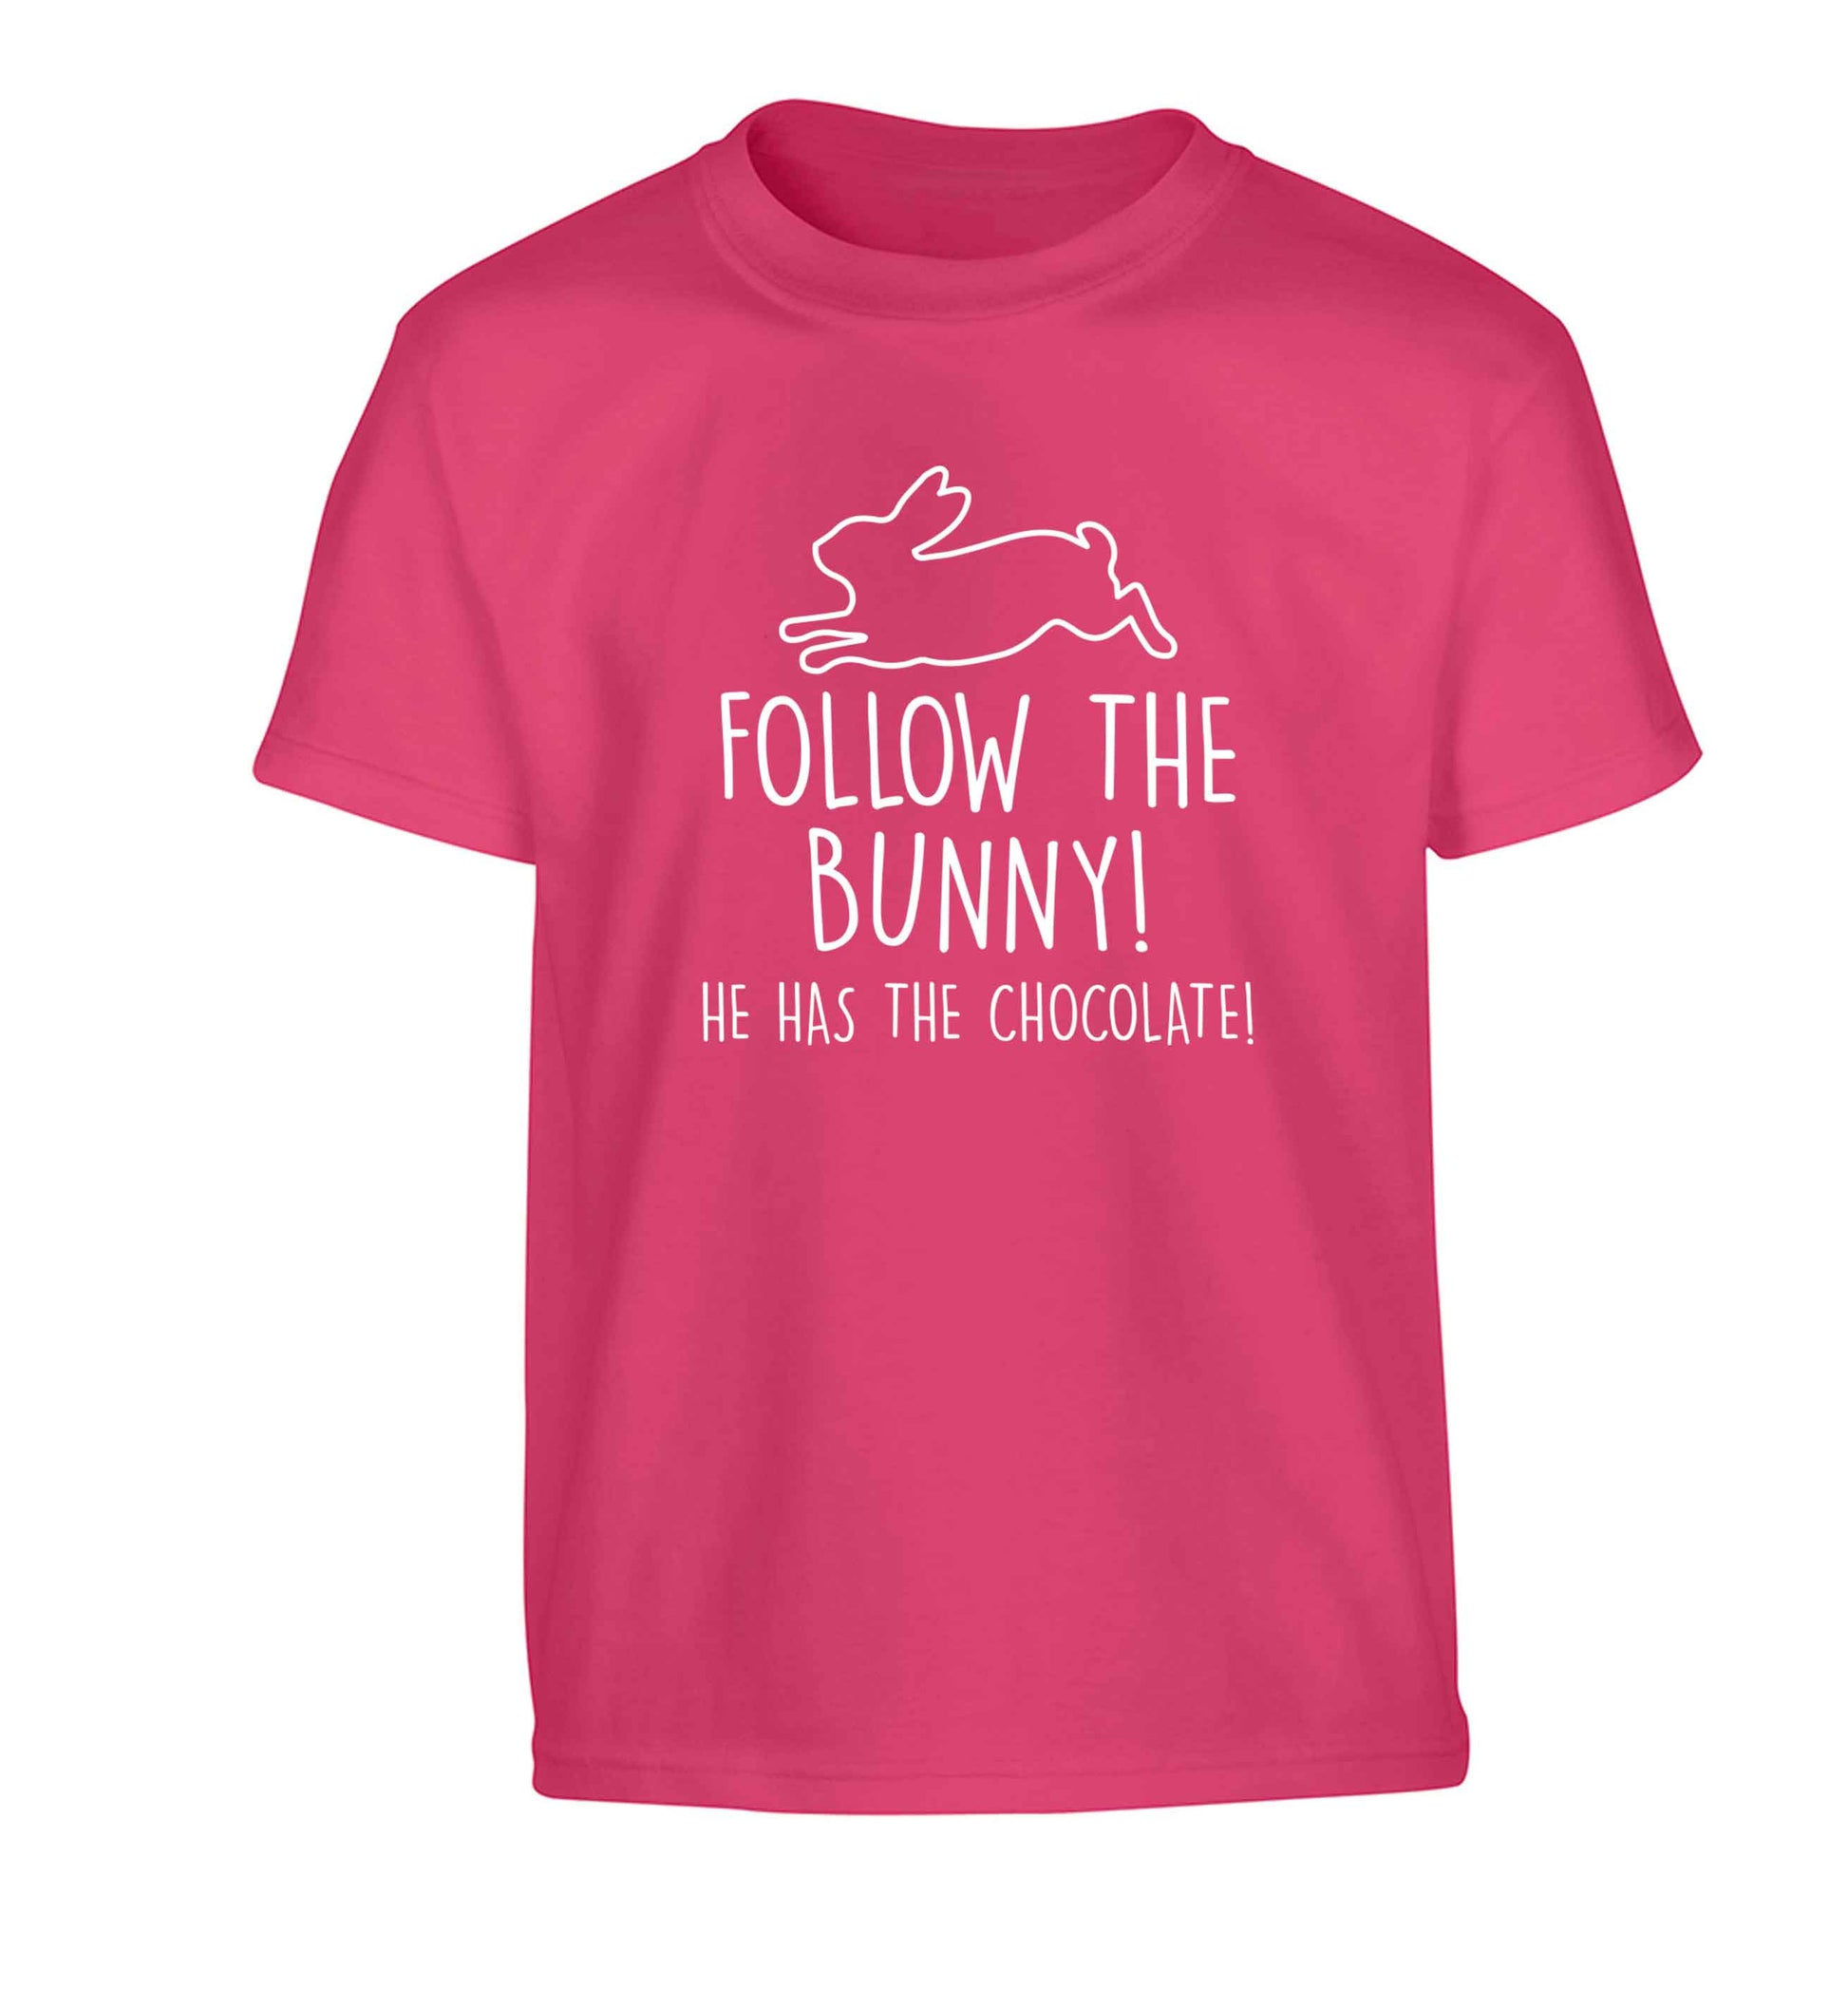 Follow the bunny! He has the chocolate Children's pink Tshirt 12-13 Years